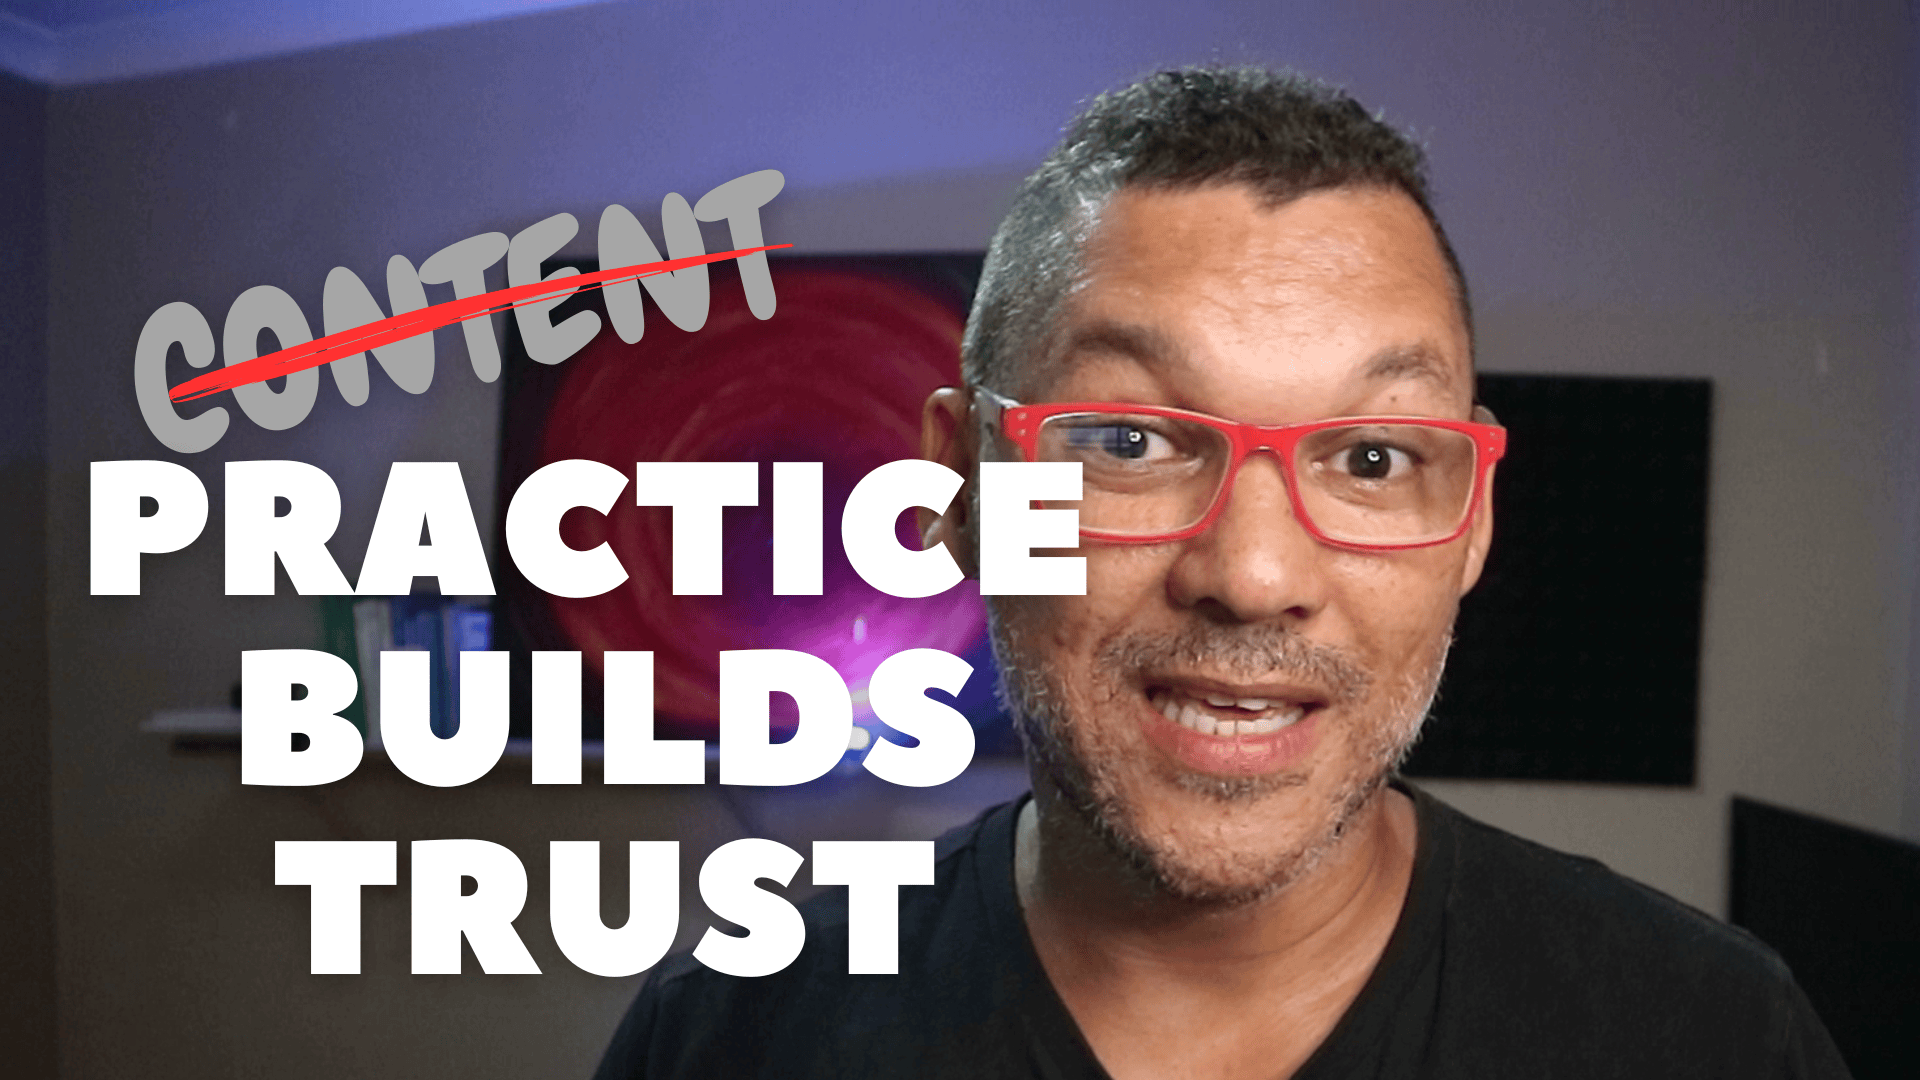 The best way to build trust with your content is to practice.